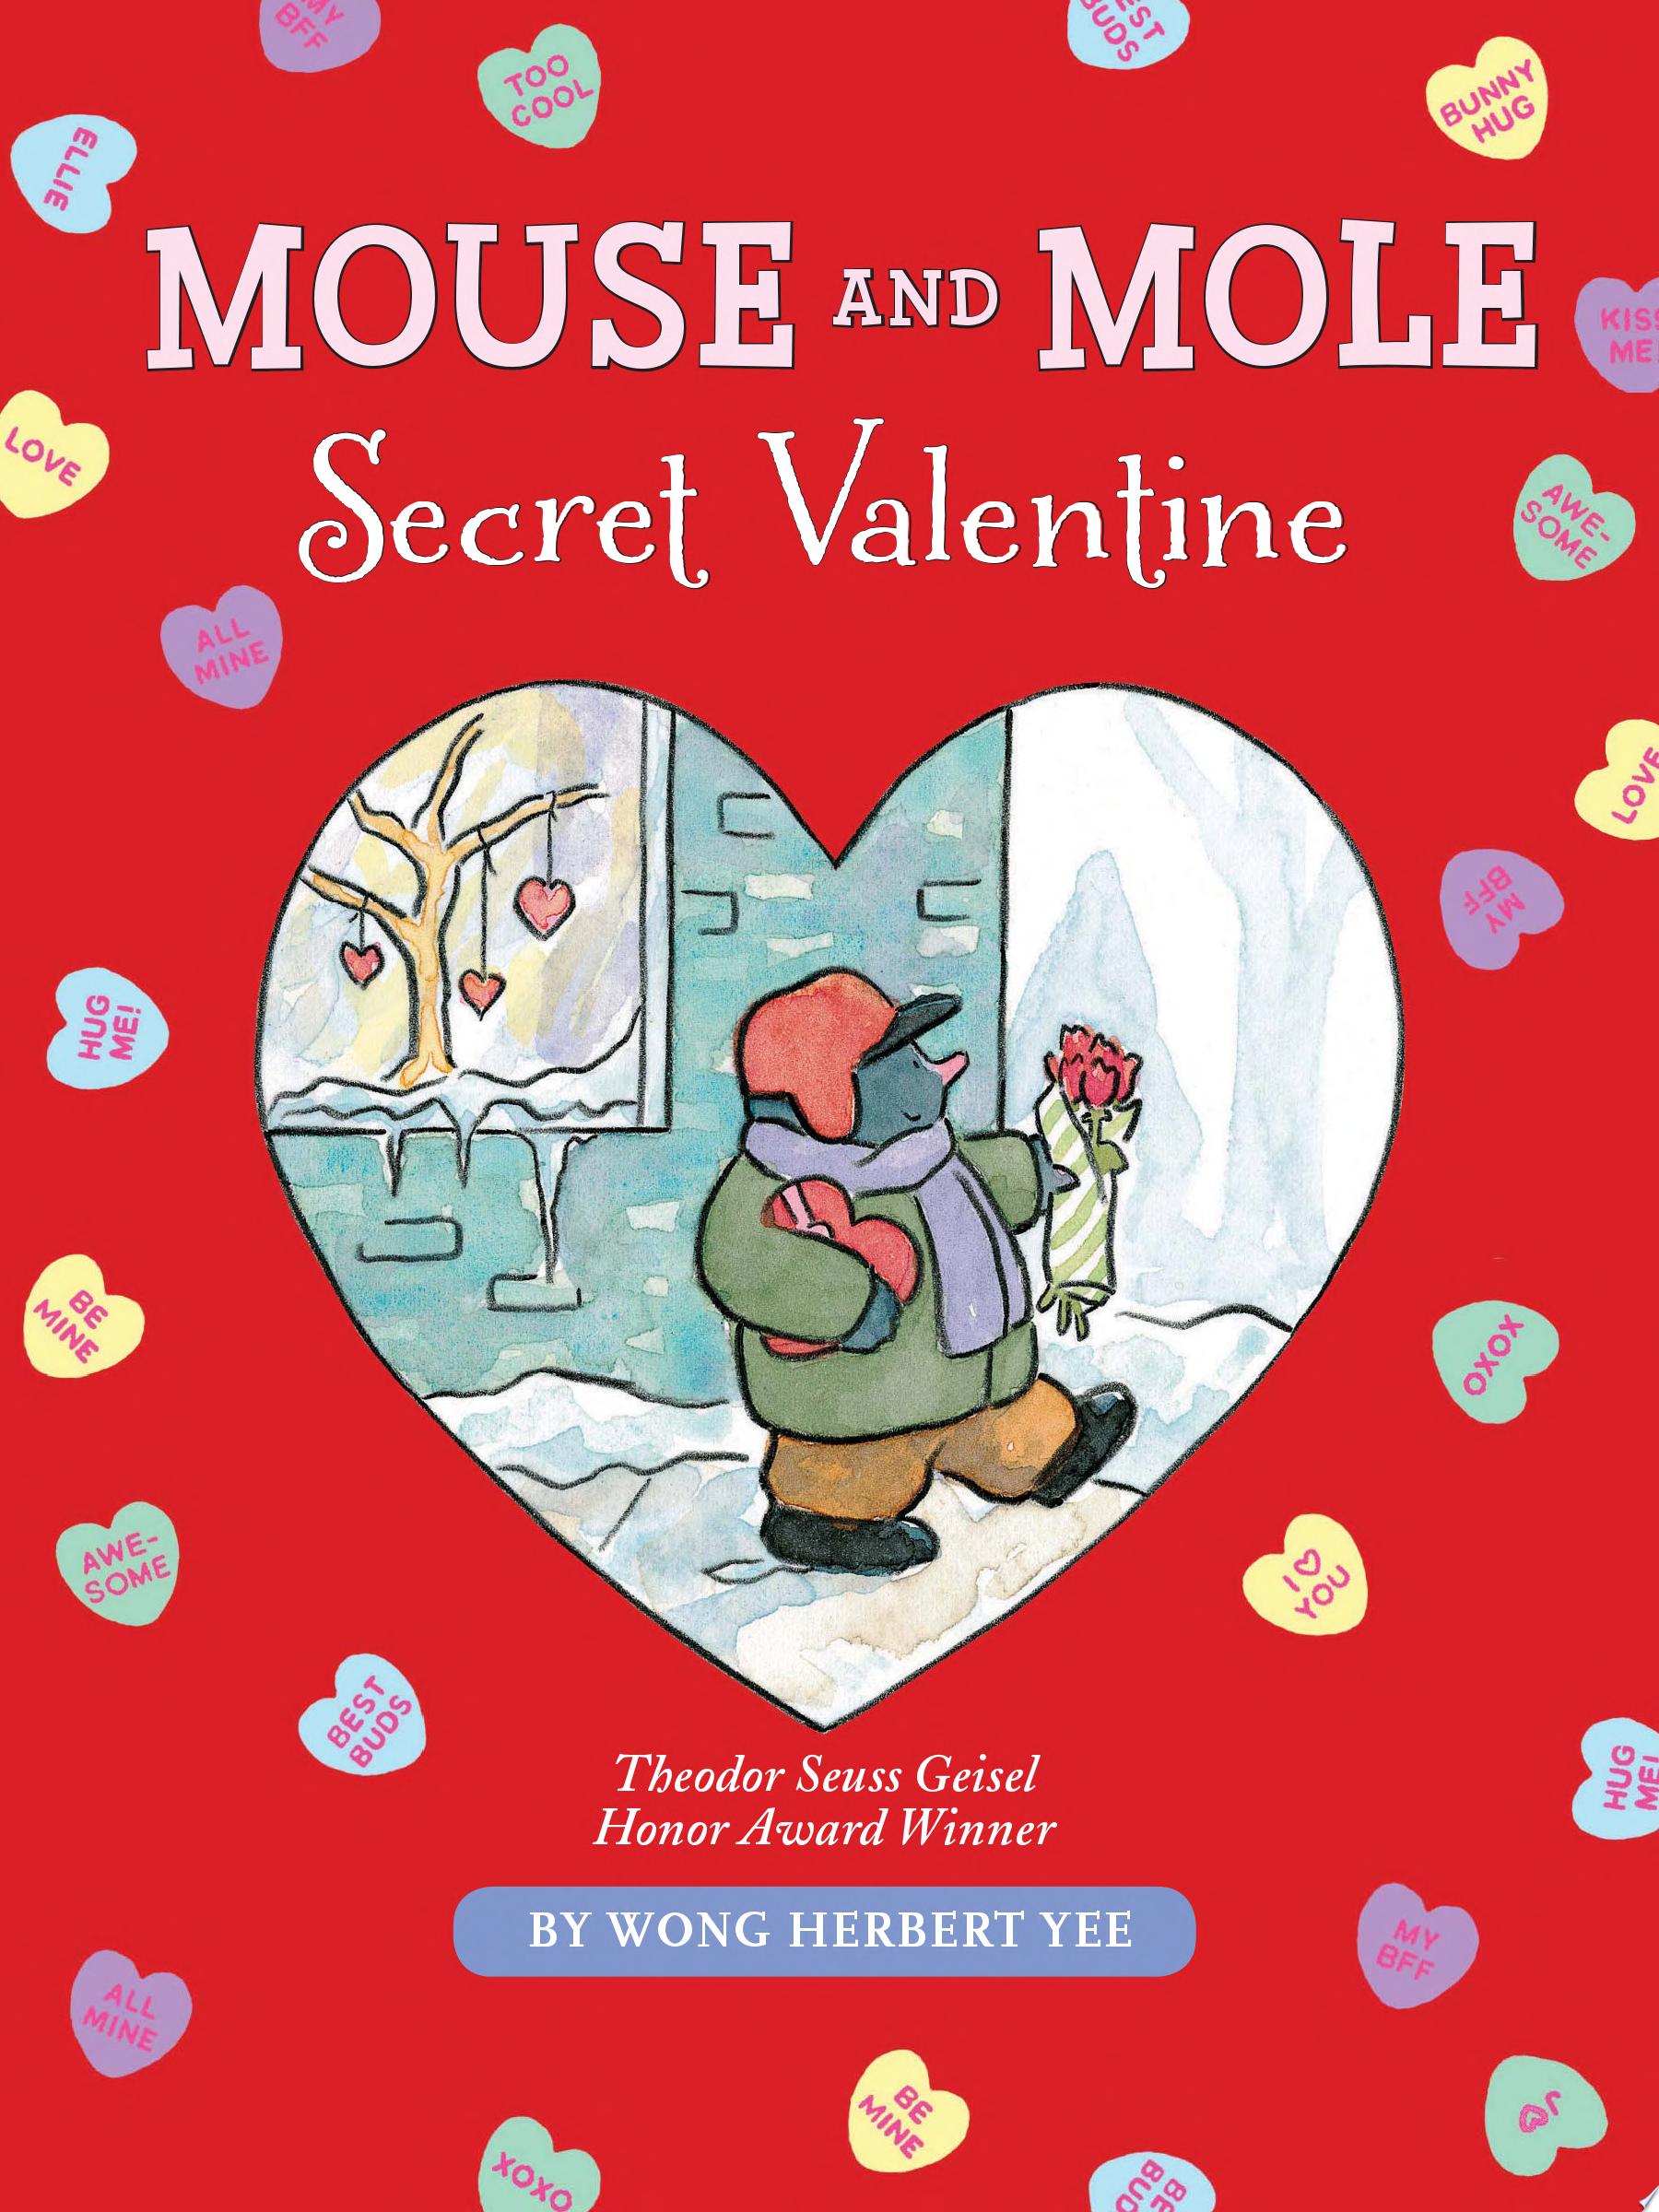 Image for "Mouse and Mole, Secret Valentine"